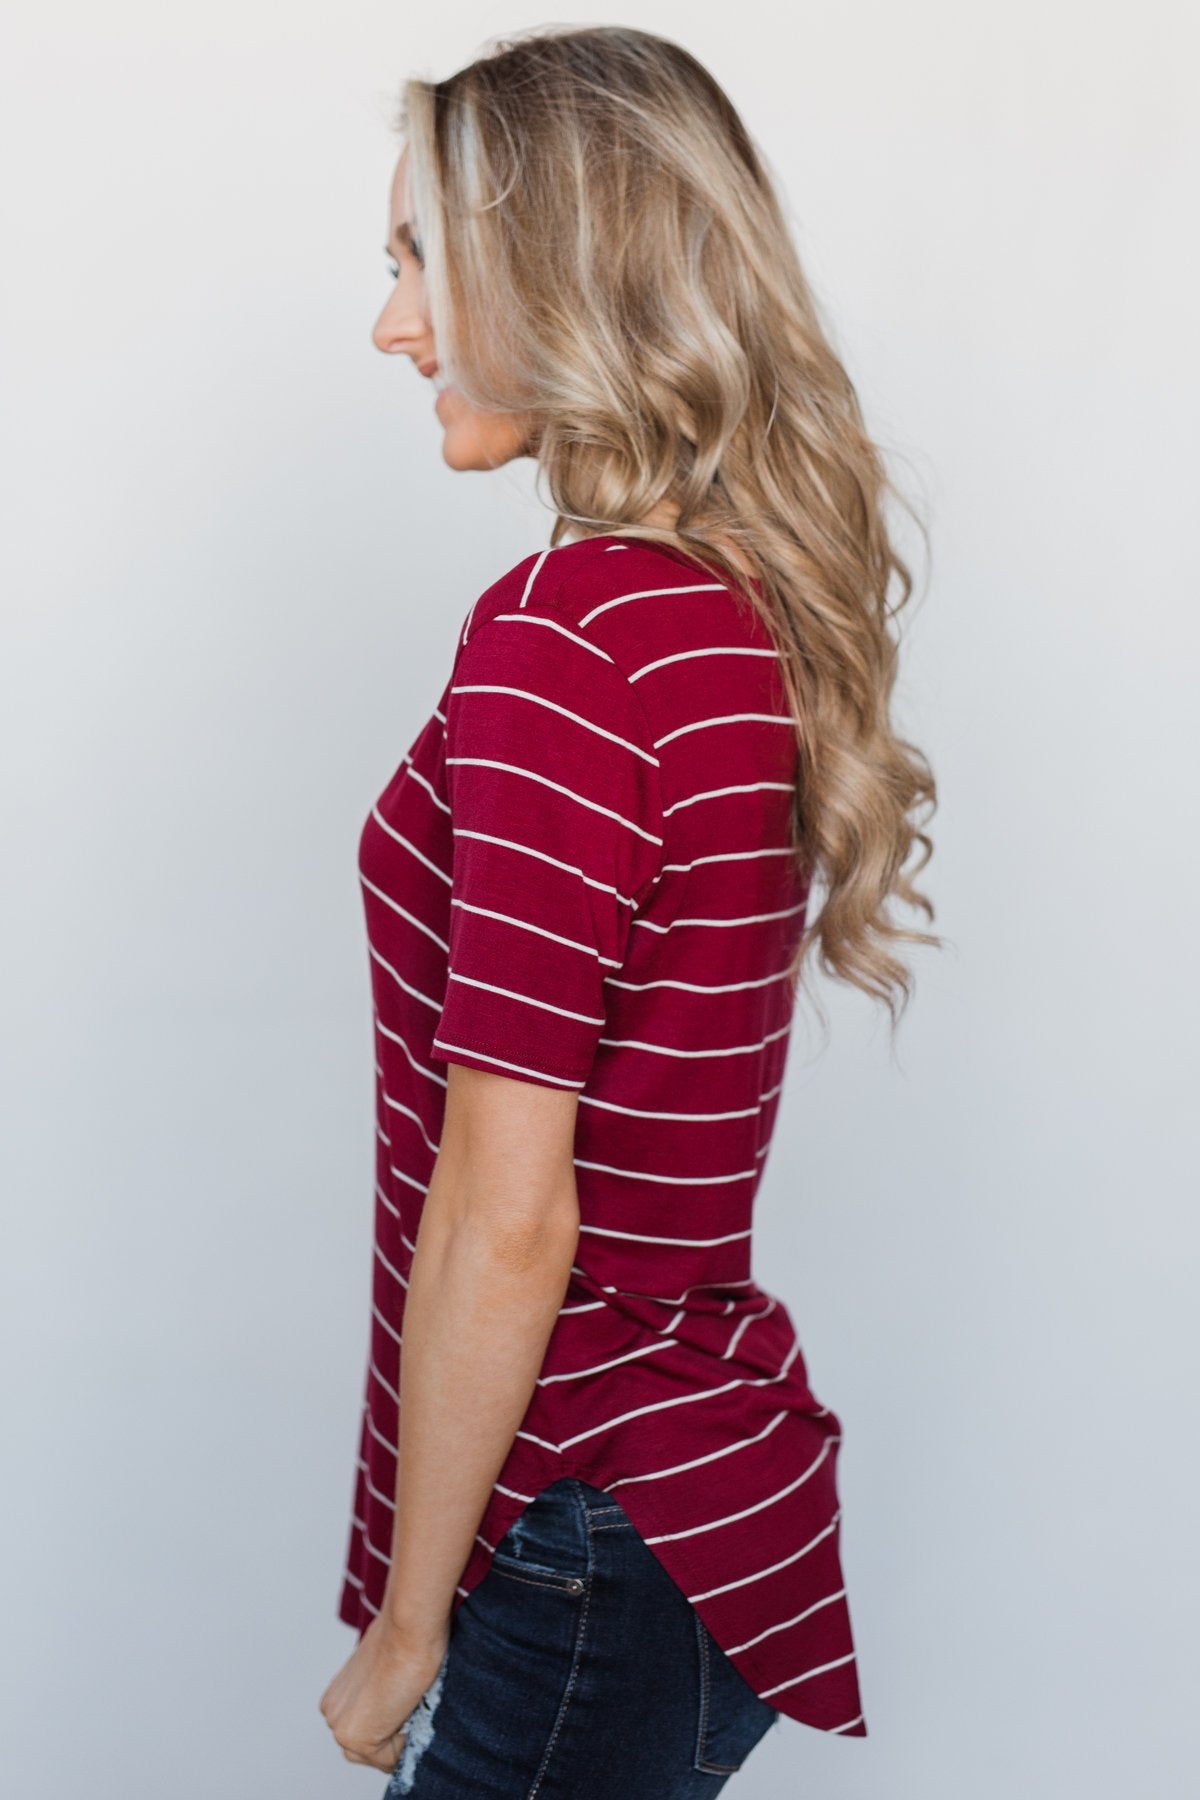 Can't Stay Away Striped Top - Burgundy